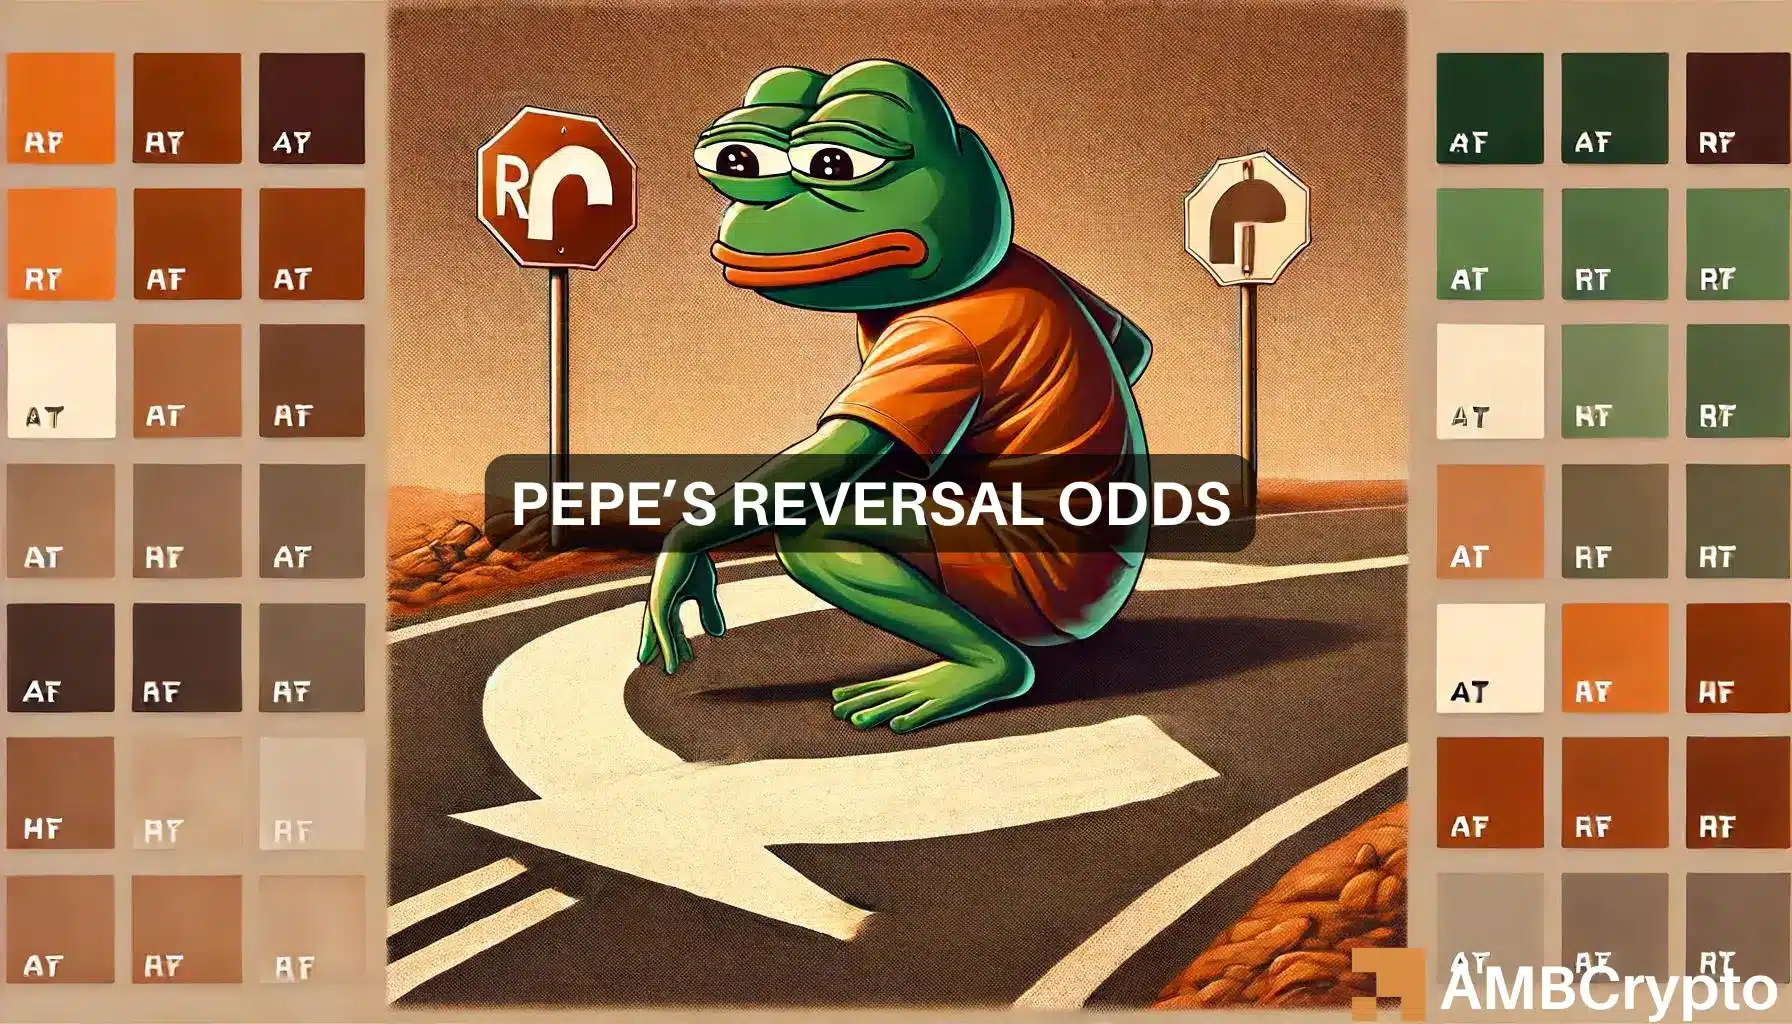 PEPE’s price reversal depends on these key factors panning out